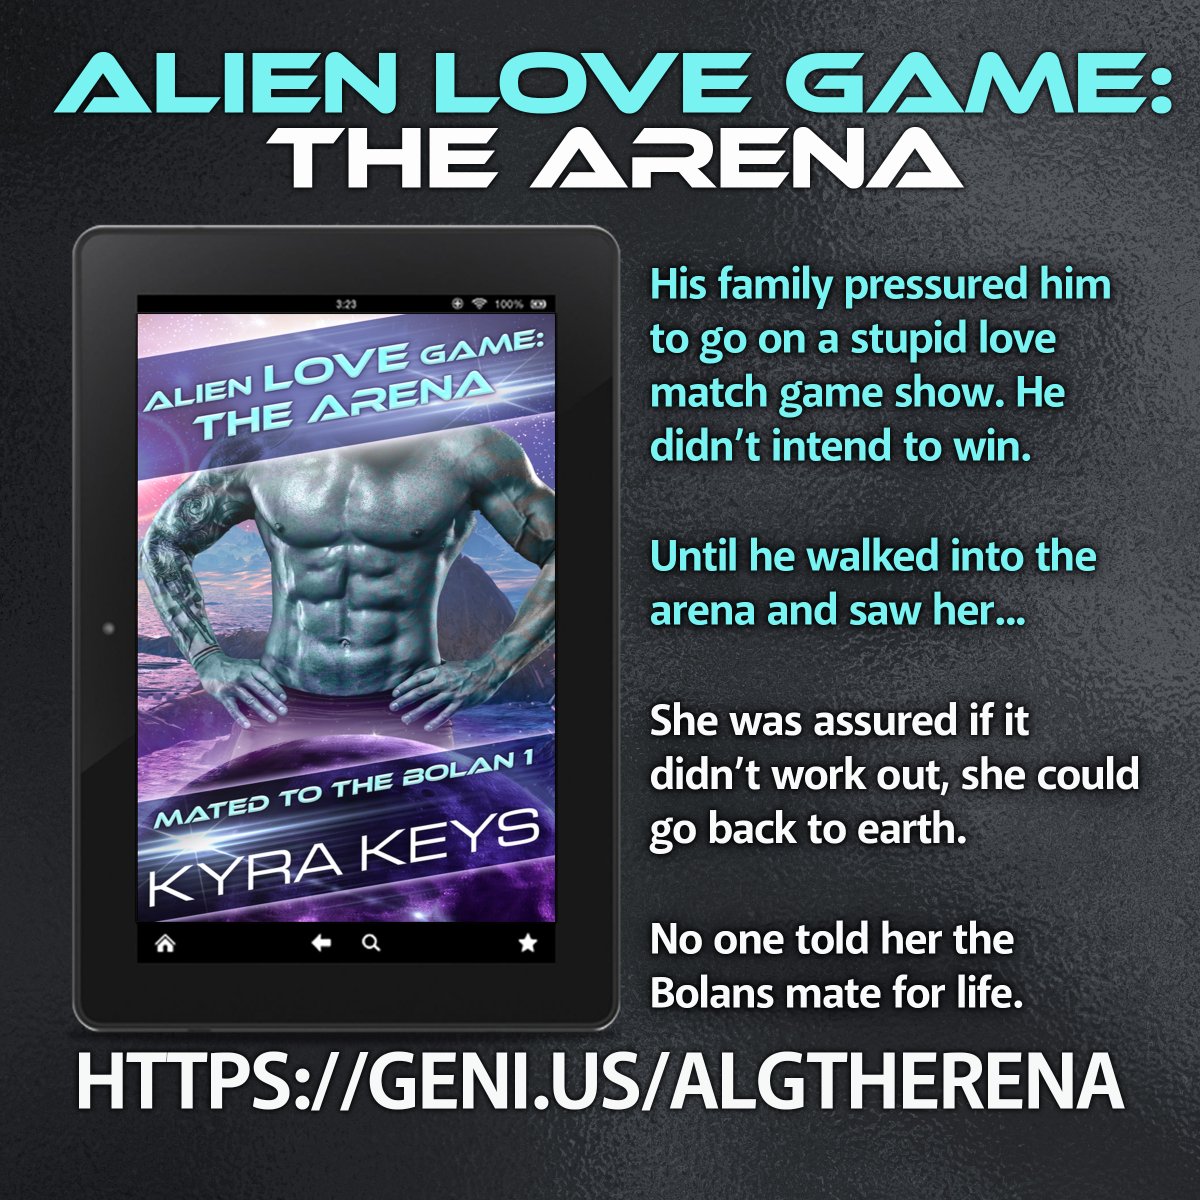 Have you read Alien Love Game: The Arena (Mated to the Bolan) by @KyraKeys yet? geni.us/algtherena His family pressured him to go on a stupid love match game show. He didn’t intend to win. #scifierotica #hotandspicy #MatedtotheBolan #aliens